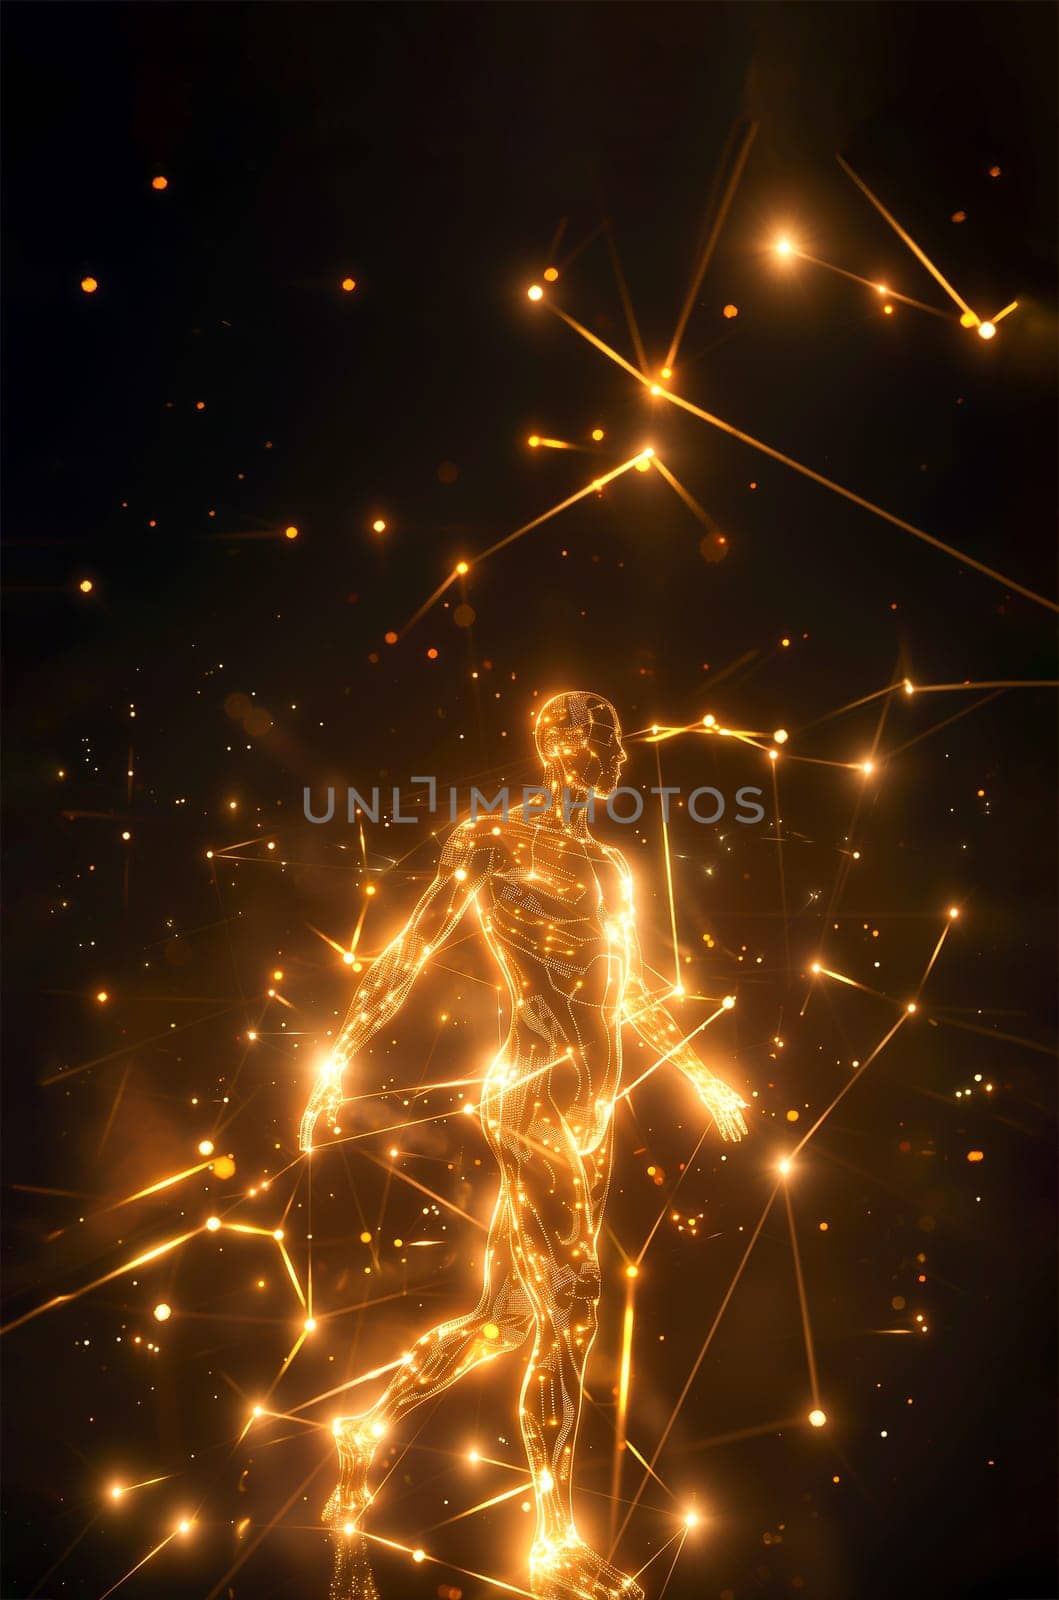 3D Man Hologram, Gold Glow Wireframe In Shape Of Human. Health, Science And Technology Concept In Dark And Golden Light. Esoteric, Astrology, Meditation, Energy Healing. Ai Generated. Vertical Plane.